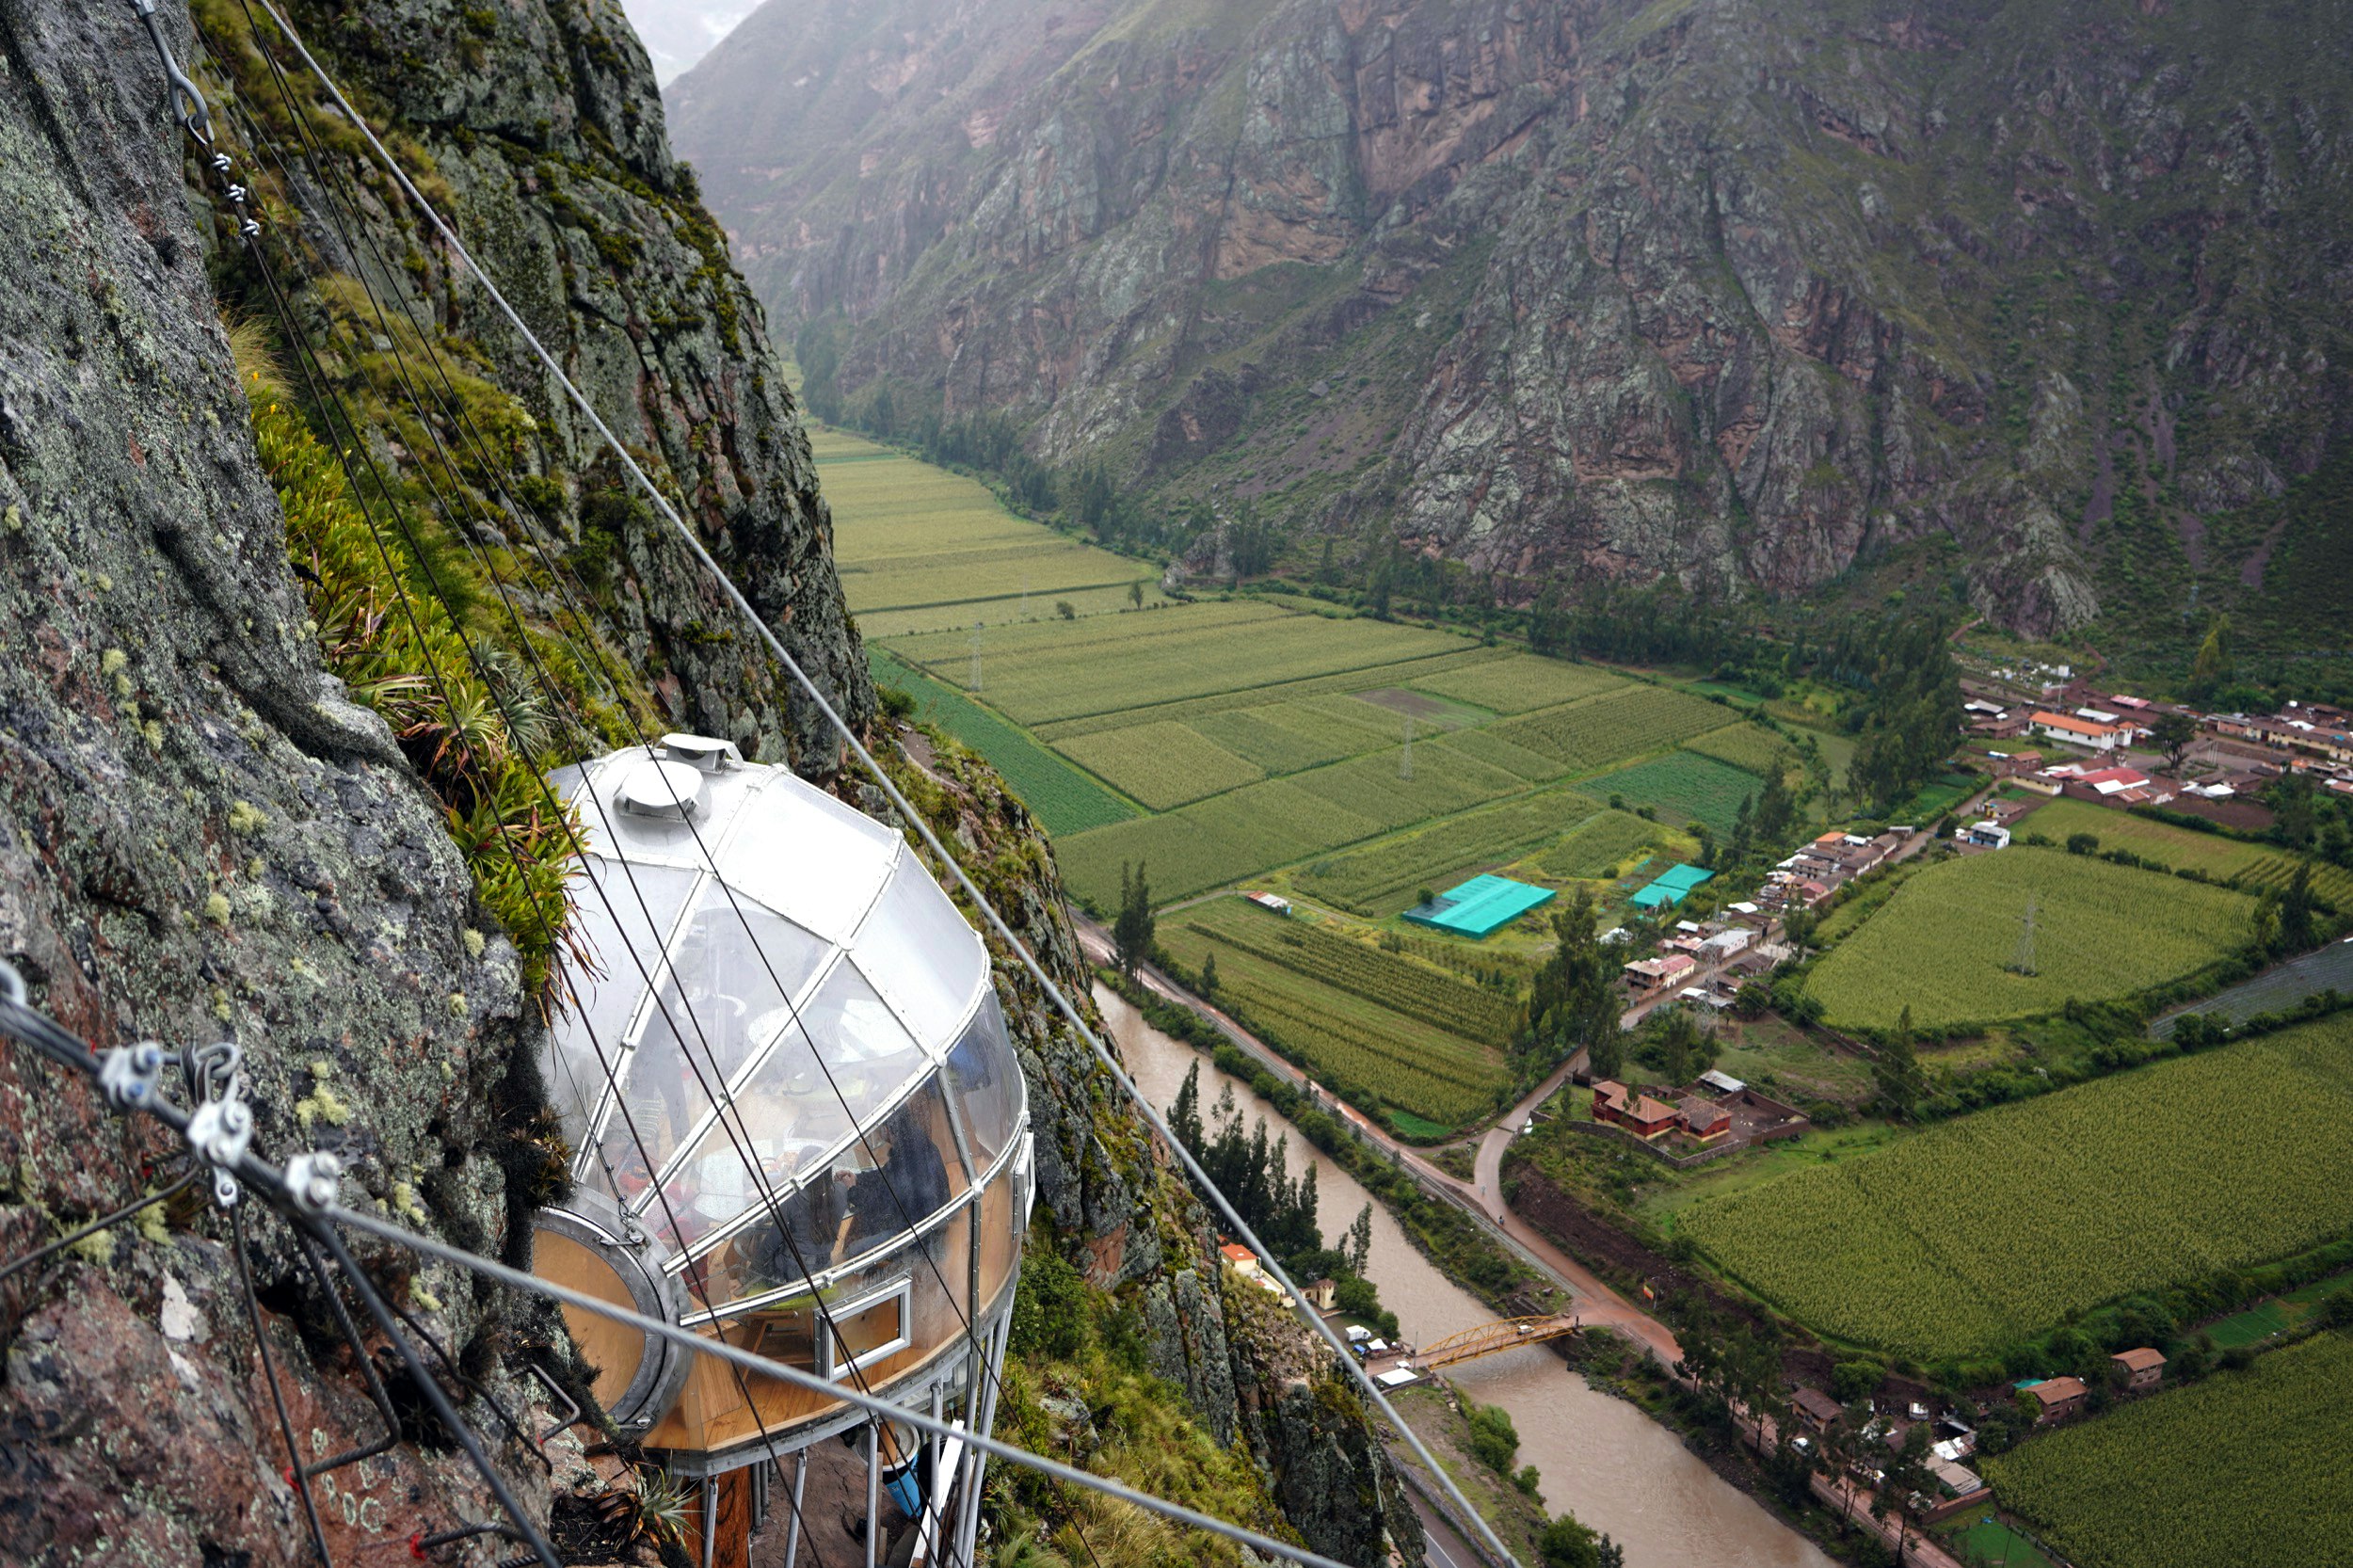 An impressive multi-level glass-walled pod is attached to a cliff face and accessible by via ferrata in Peru